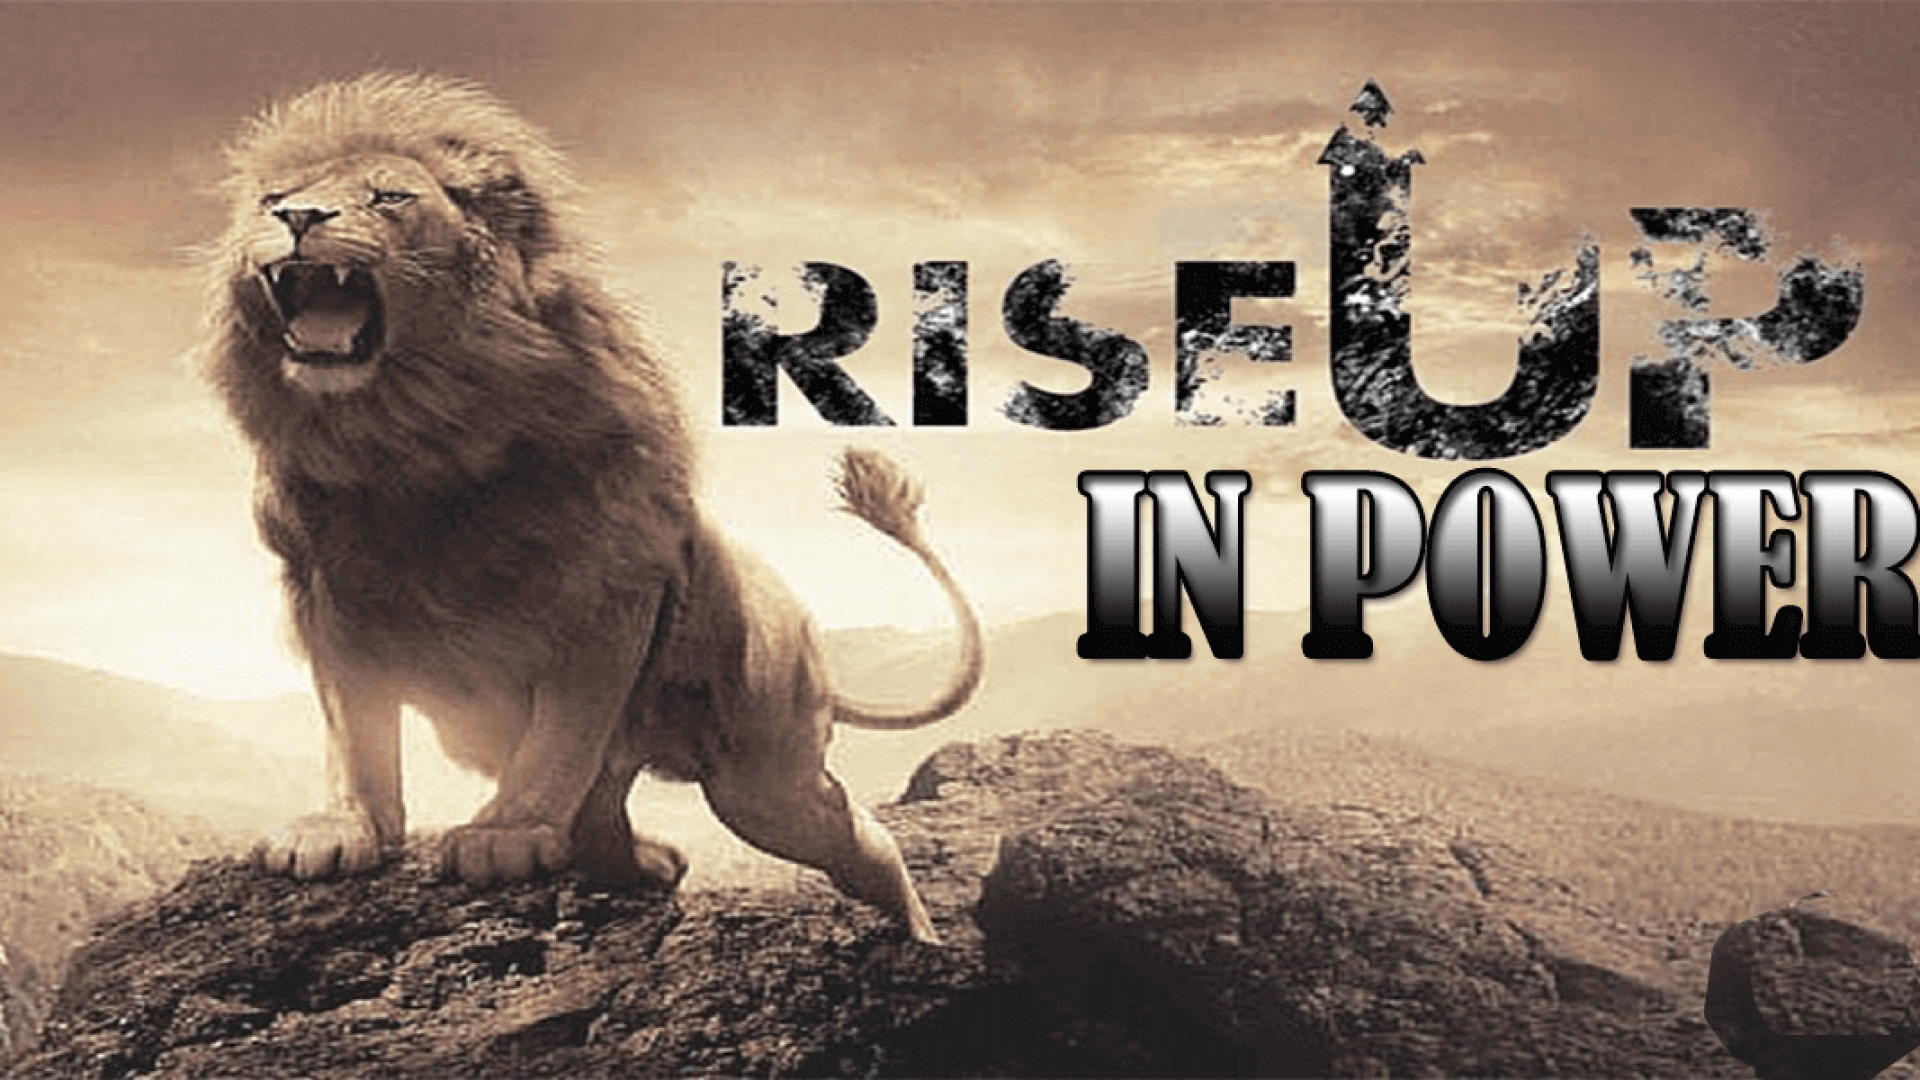 RISE UP IN POWER